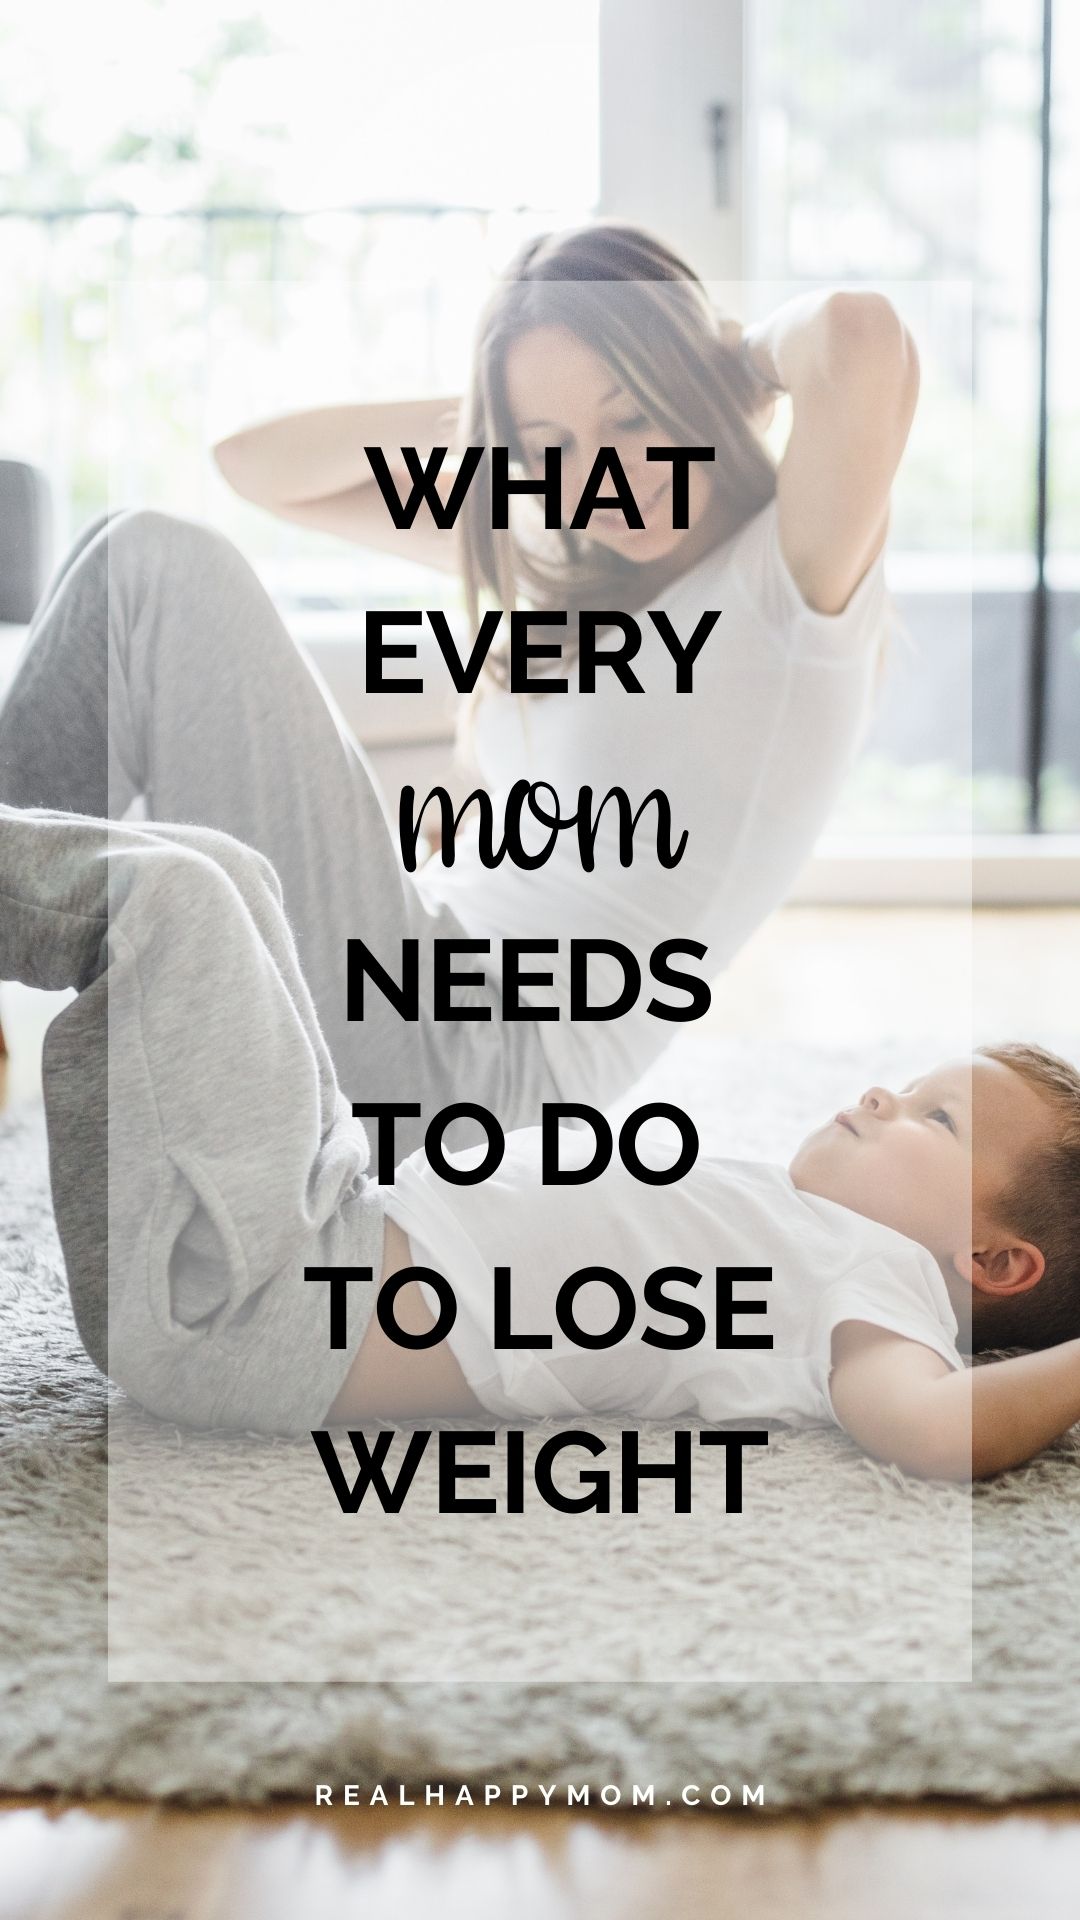 What Every Mom Needs to do to Lose Weight